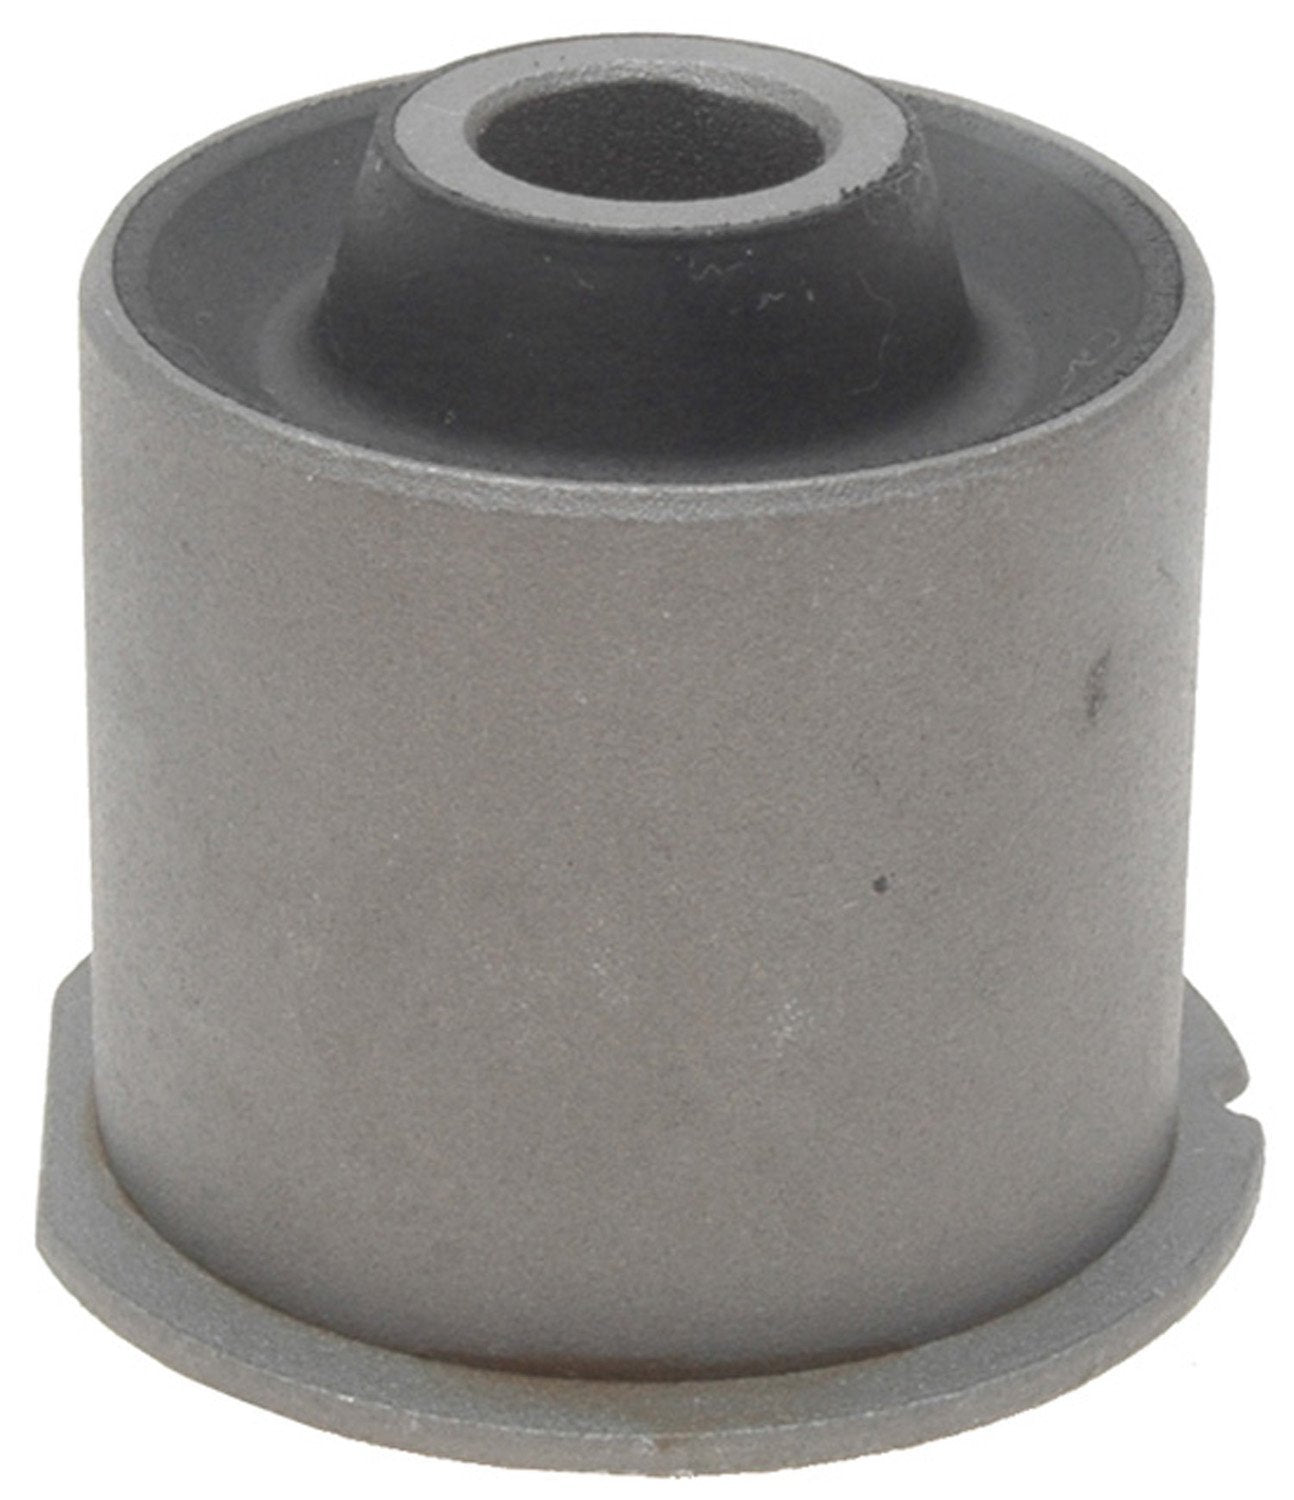 ACDelco 45G11156 Professional Rear Lower Front Suspension Control Arm Bushing - Brand New - new